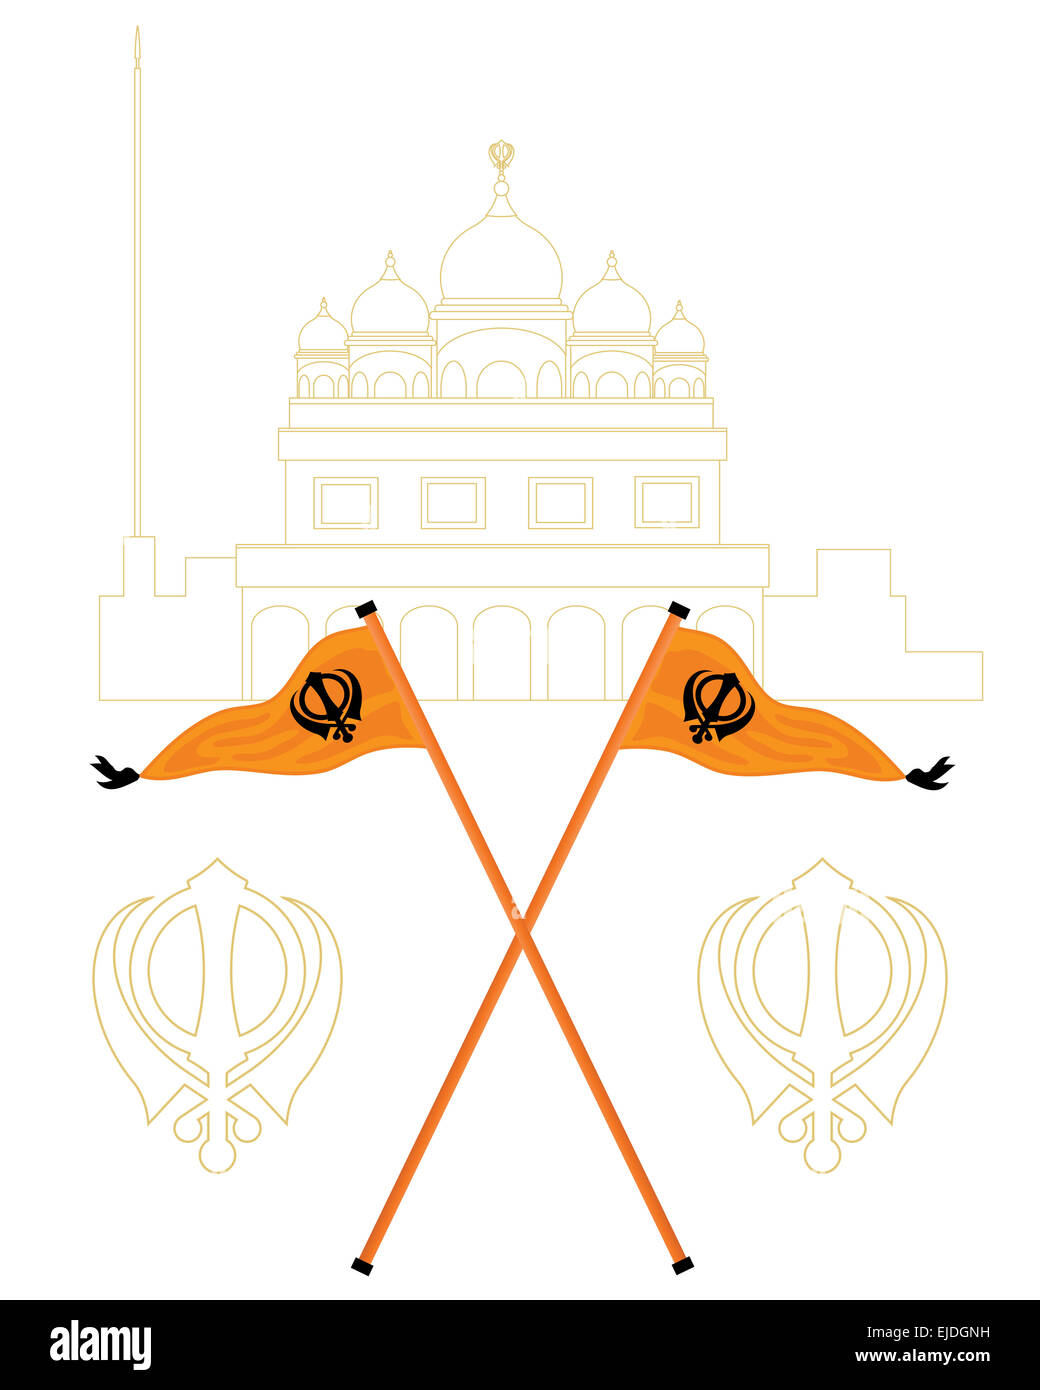 an illustration of an abstract white and gold gurdwara with the Sikh flags called nishan sahib in orange and black Stock Photo